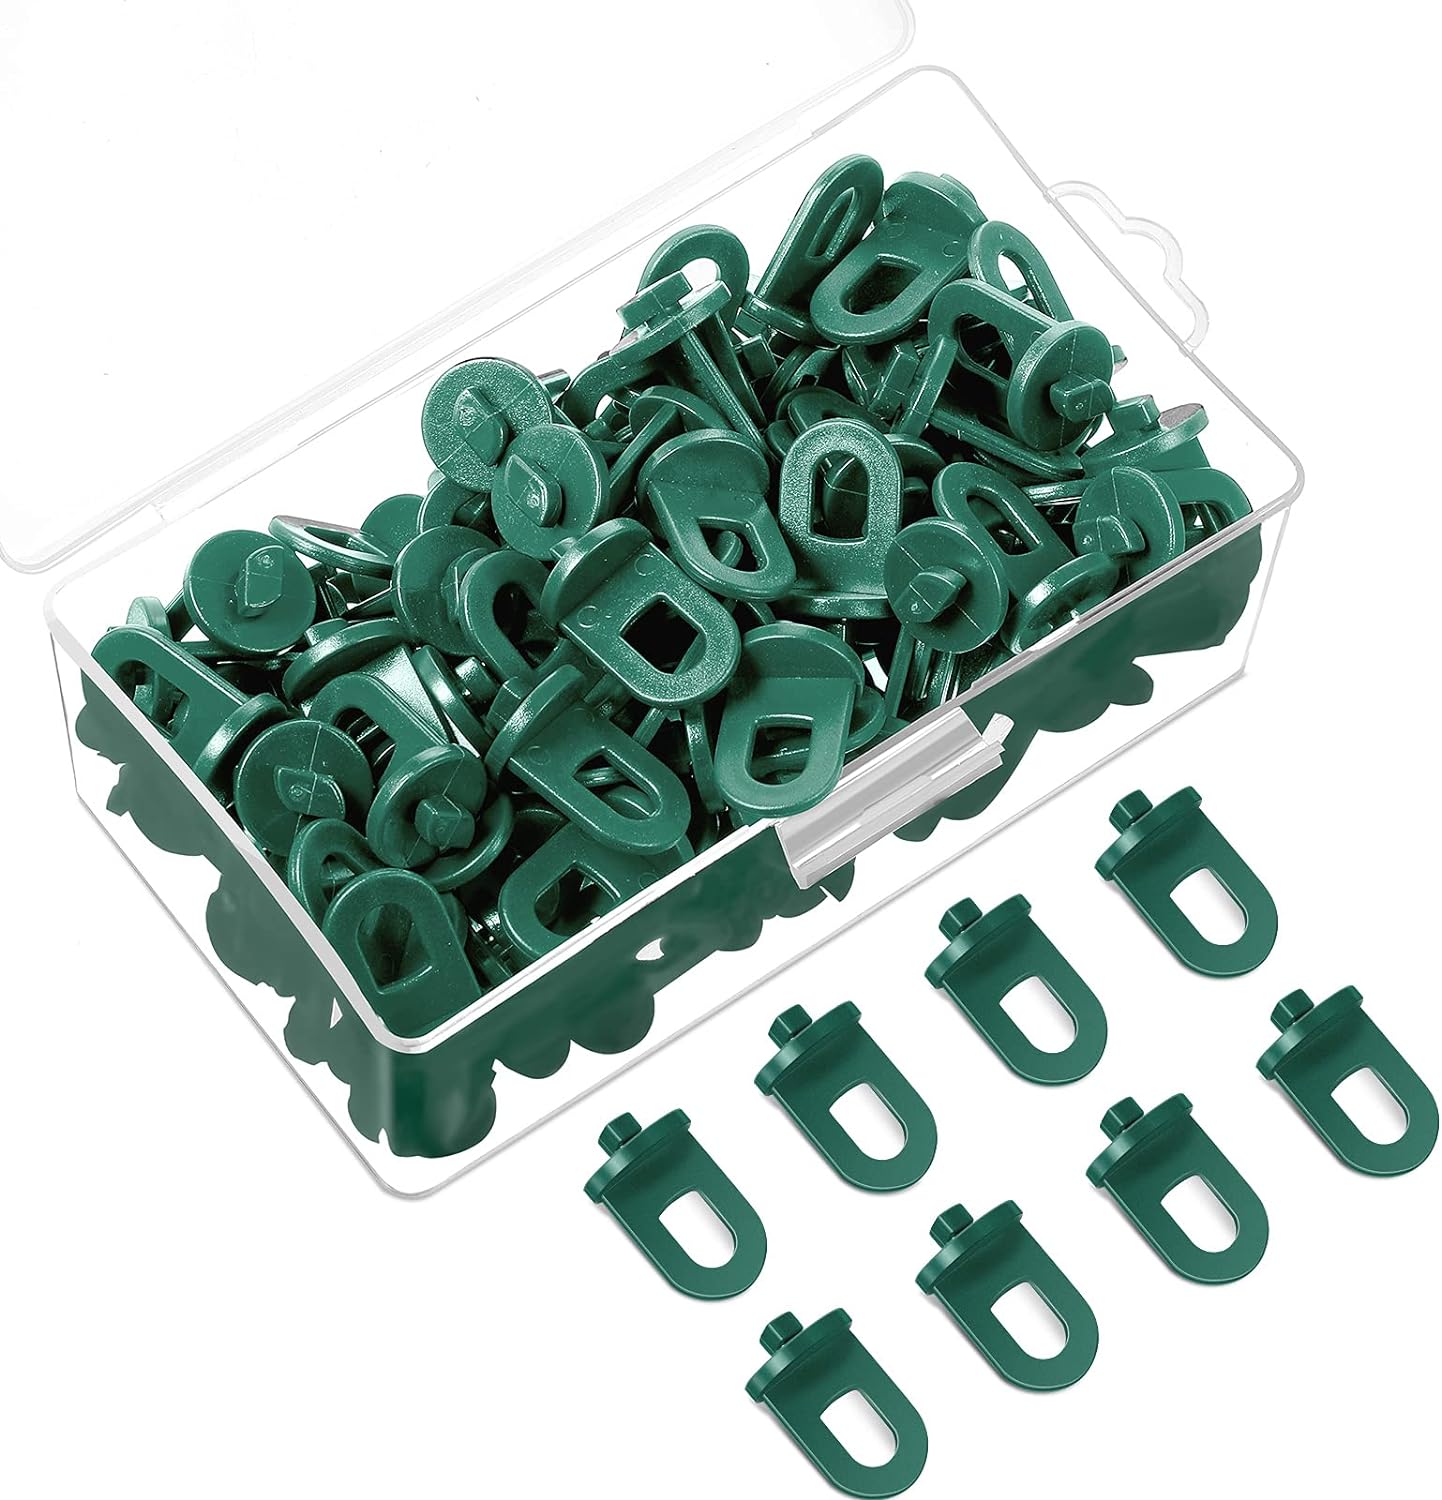 Greenhouse Twist Clips Plastic Greenhouse Fixing Clips Packaged in a Clear Box for Aluminium Greenhouse Insulation Netting Shading (100 Pieces)